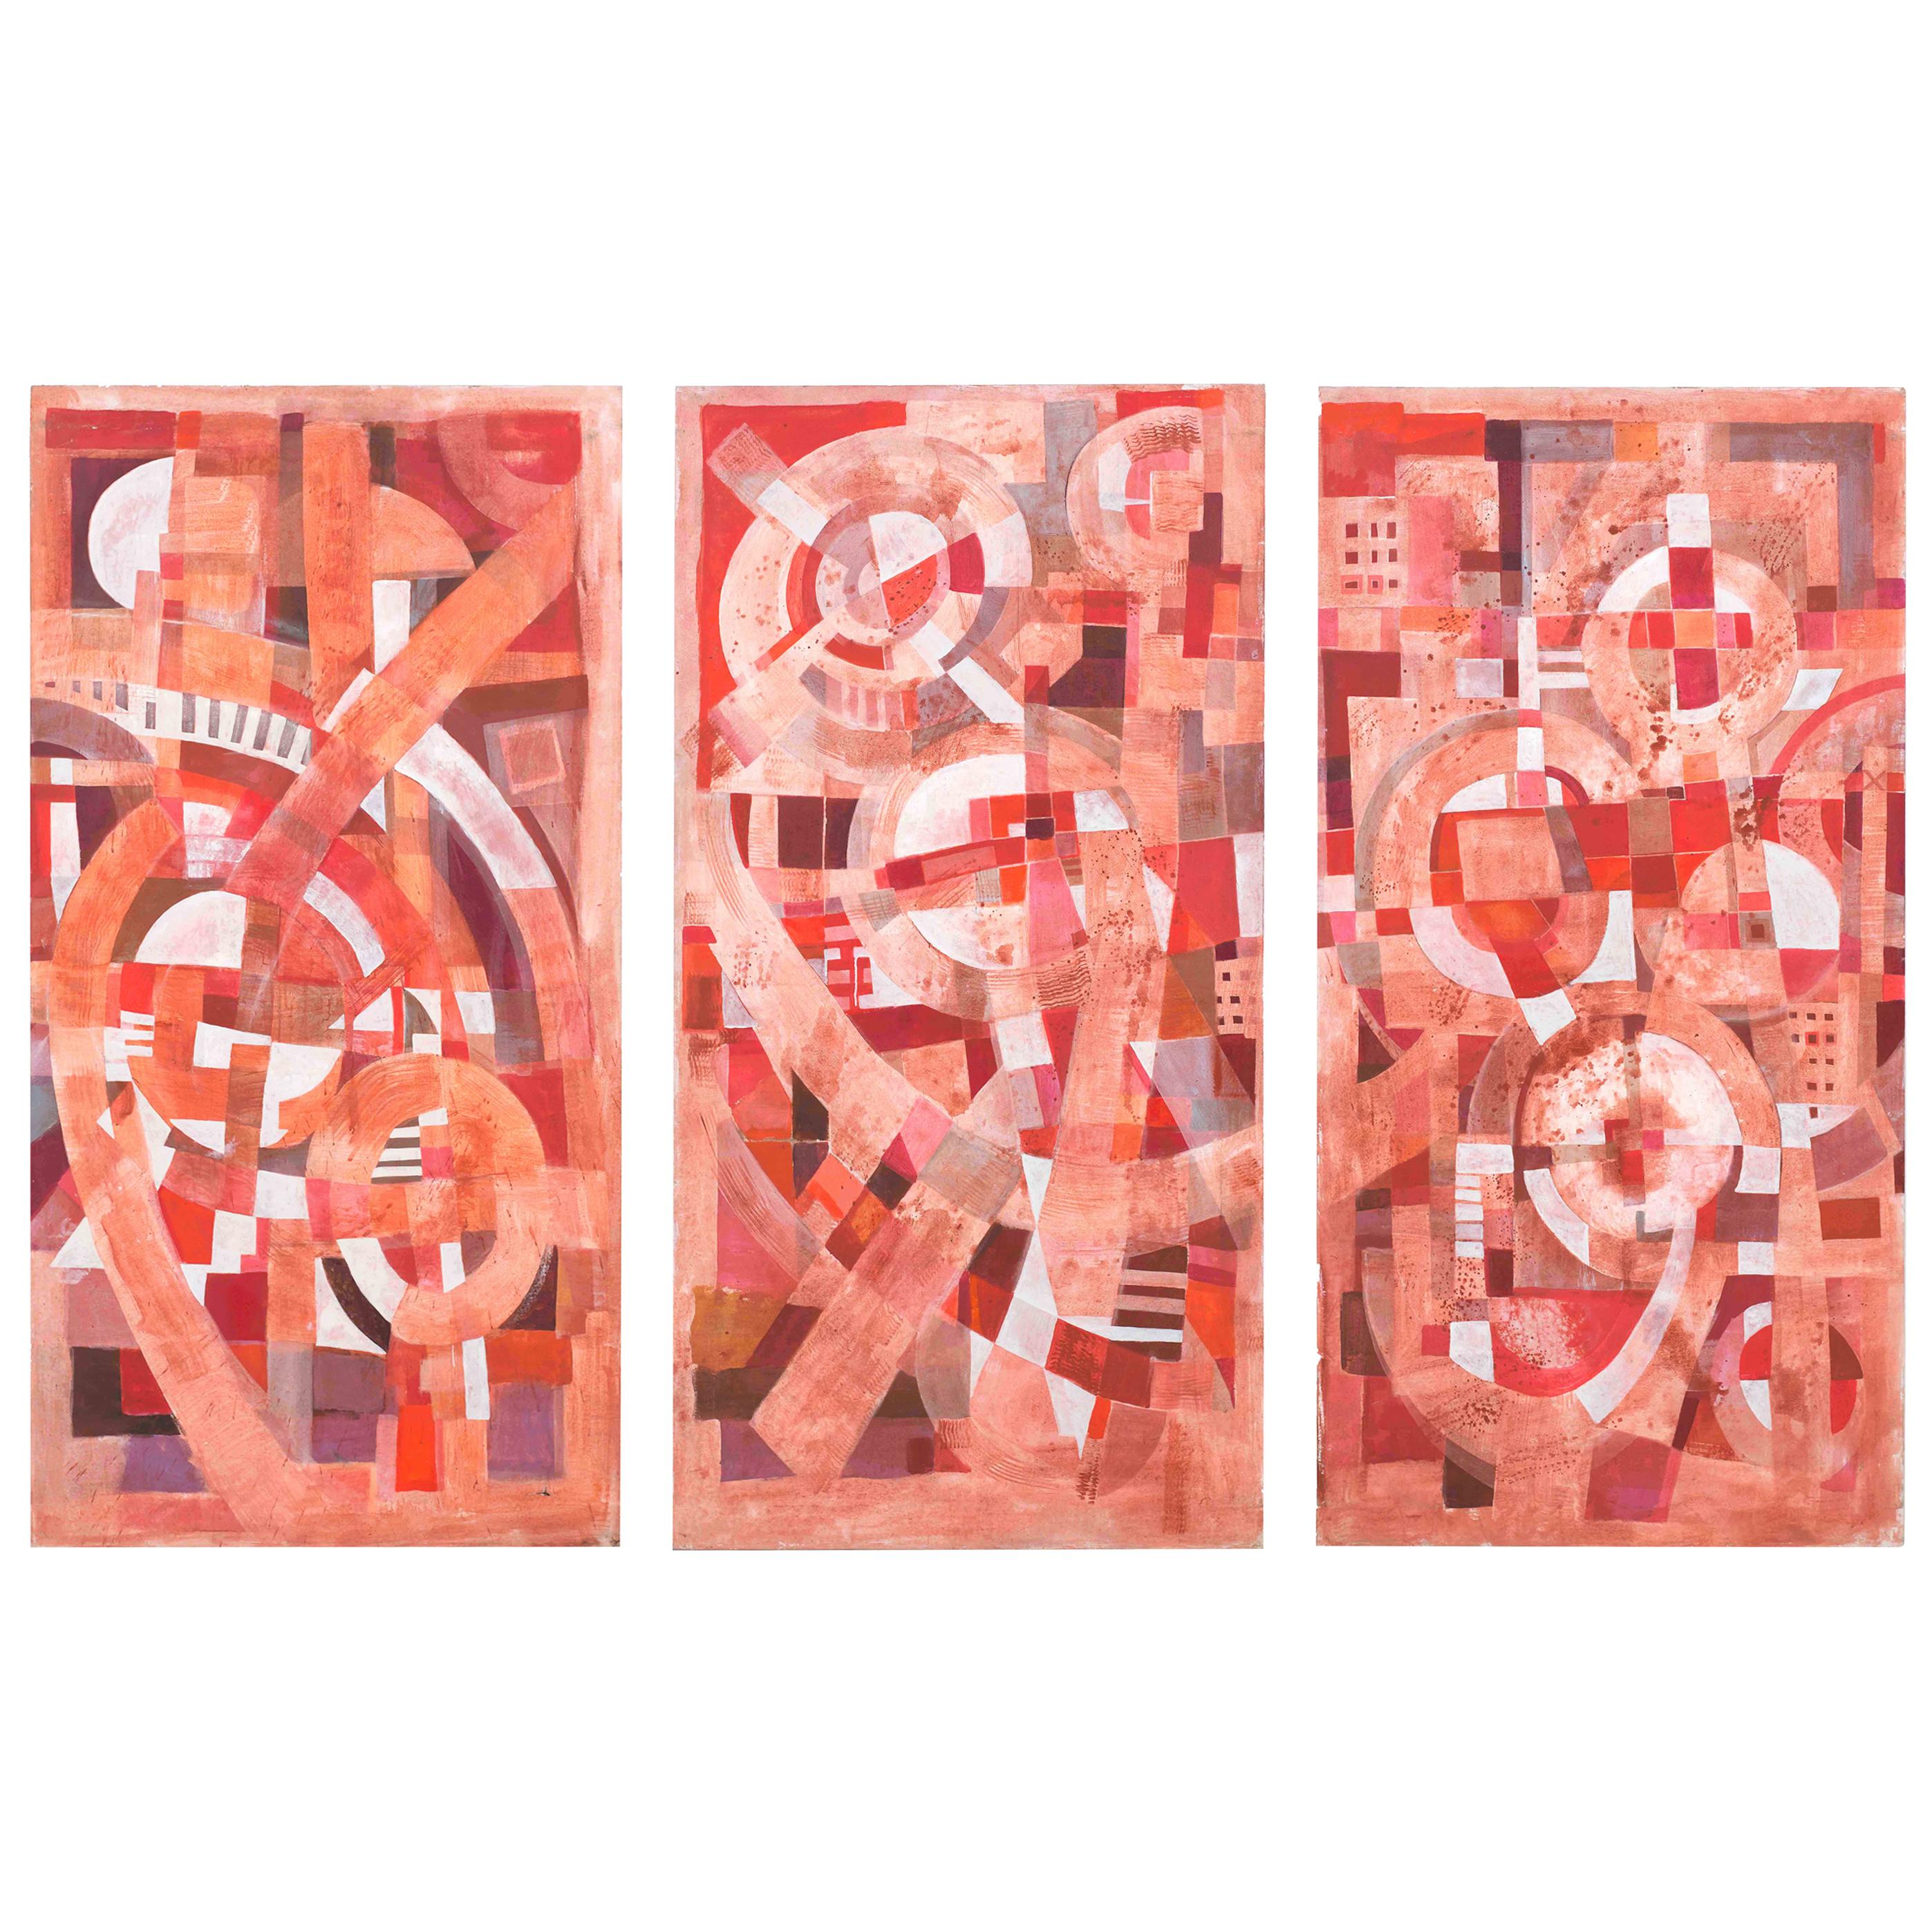 Tom John Goauche on Canvas Abstract Triptych (2010)